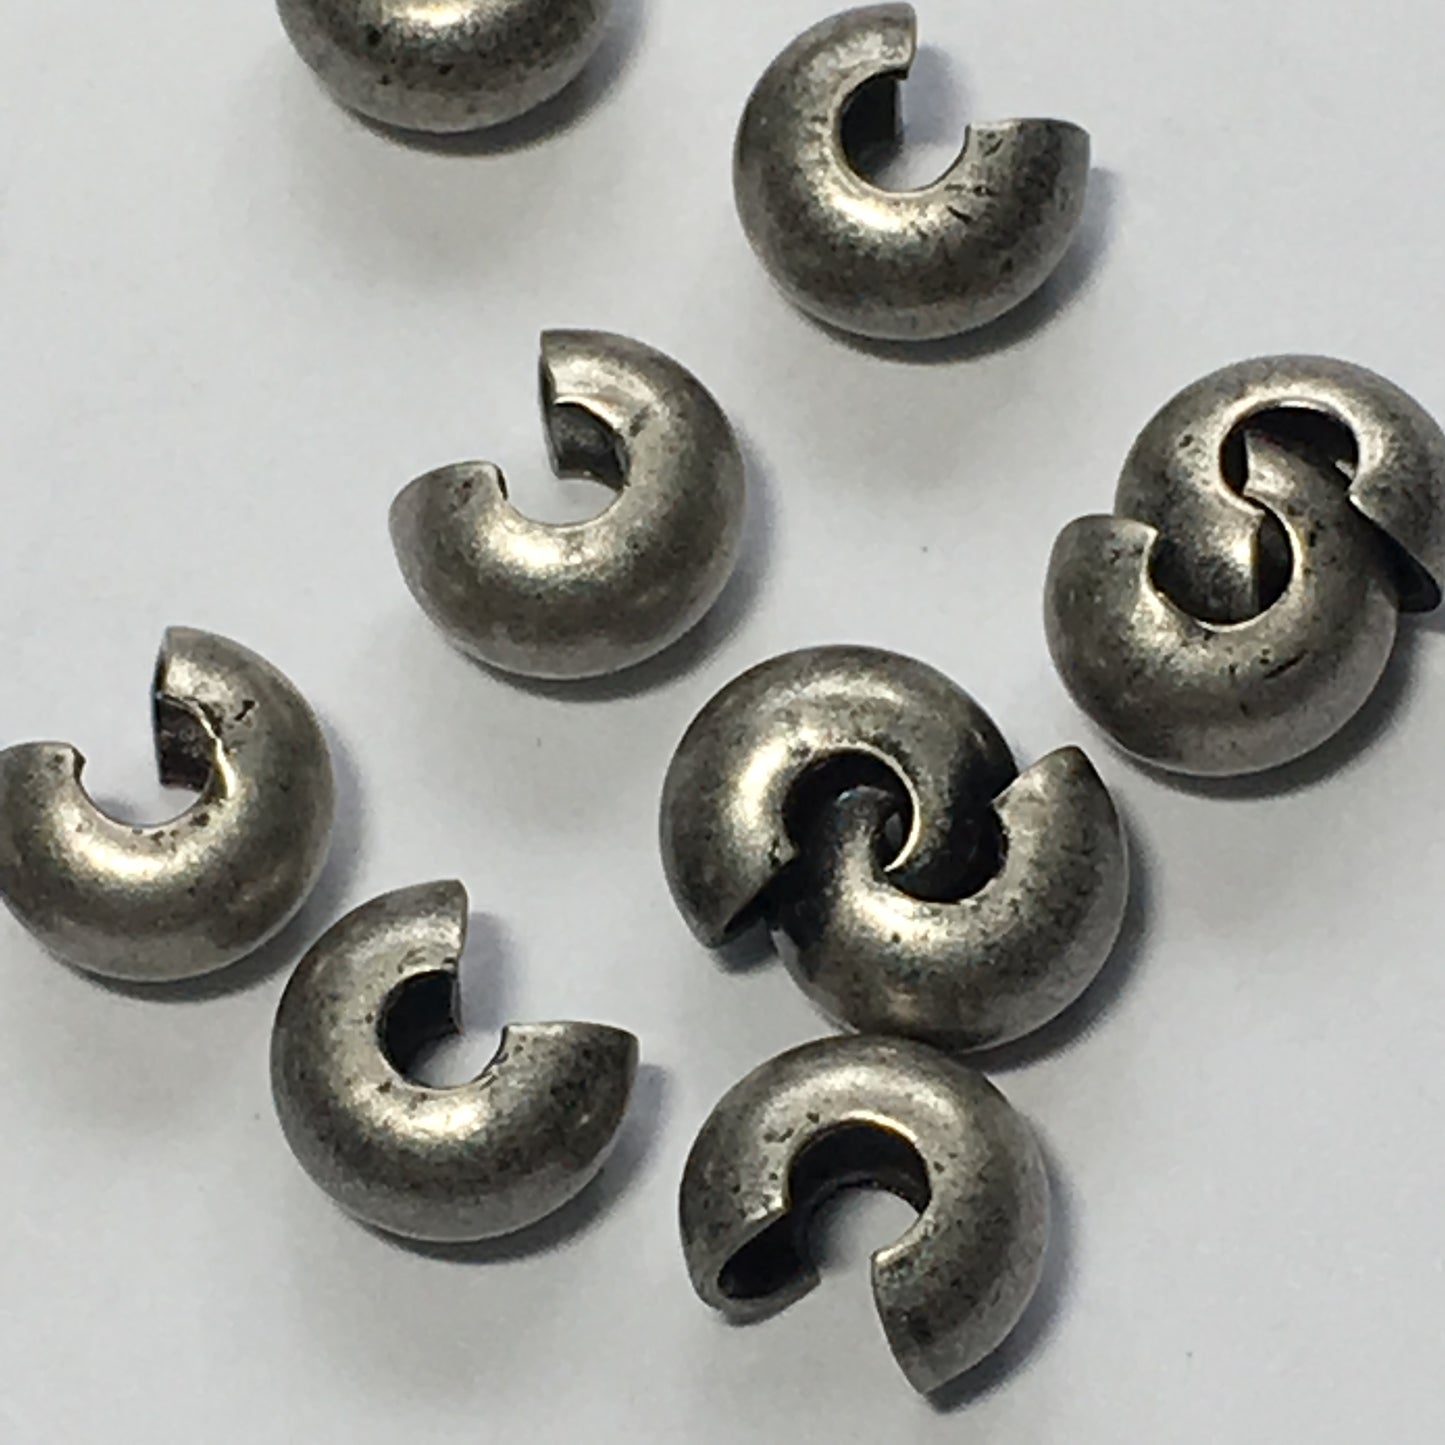 Pewter Finish Crimp Bead Covers, 3 mm Wide- 12 Covers